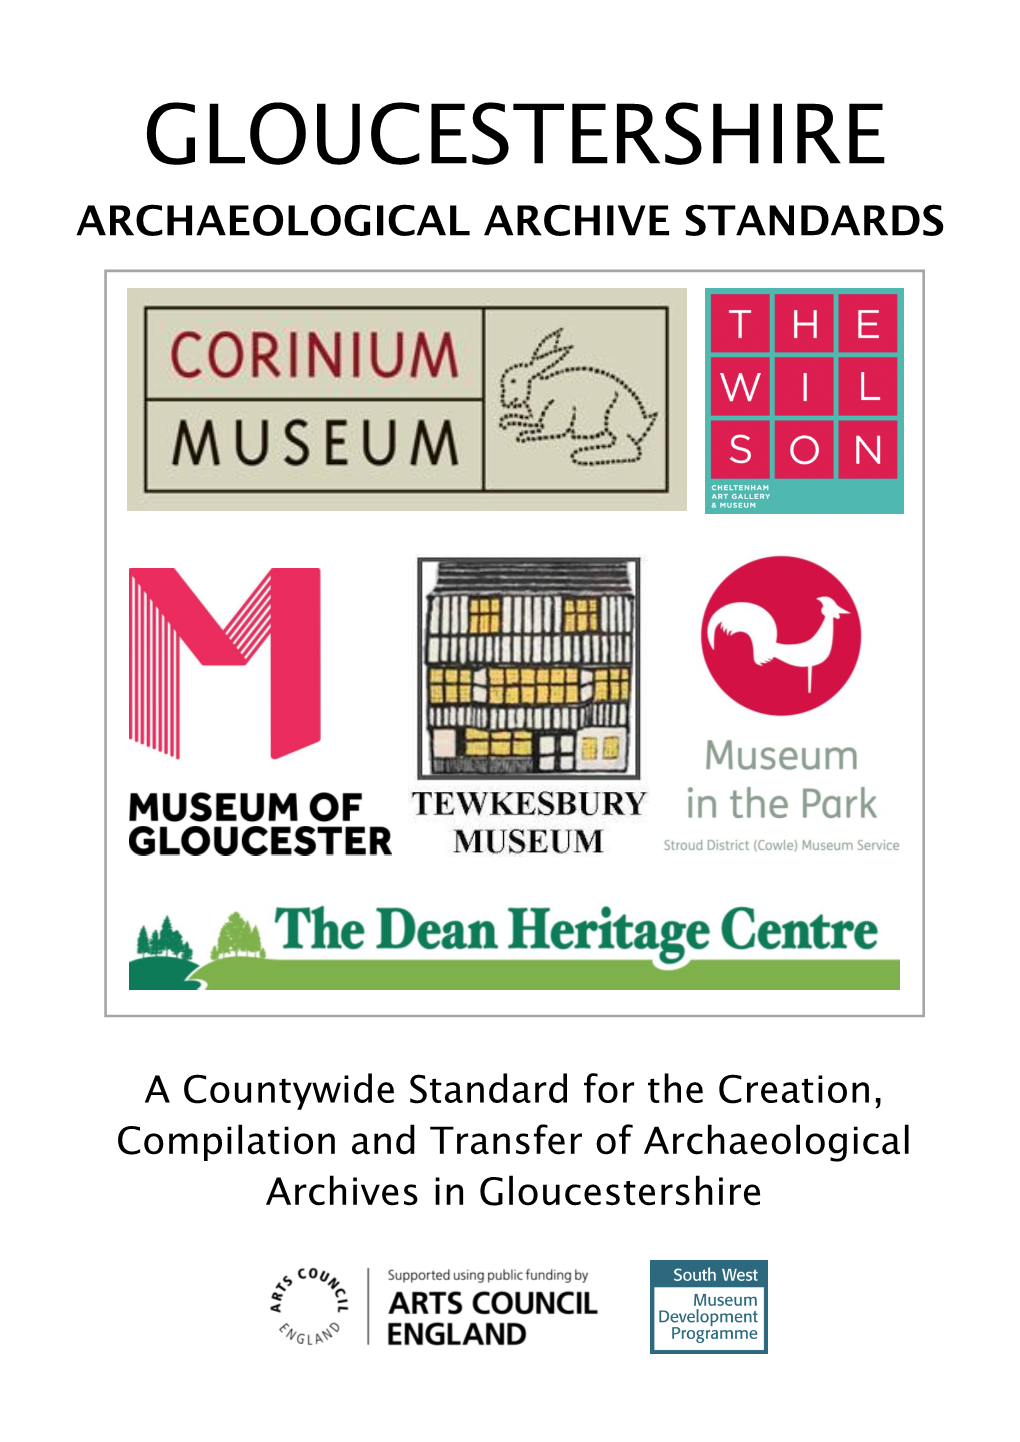 Gloucestershire Archaeological Archive Standards Version 1B January 2018